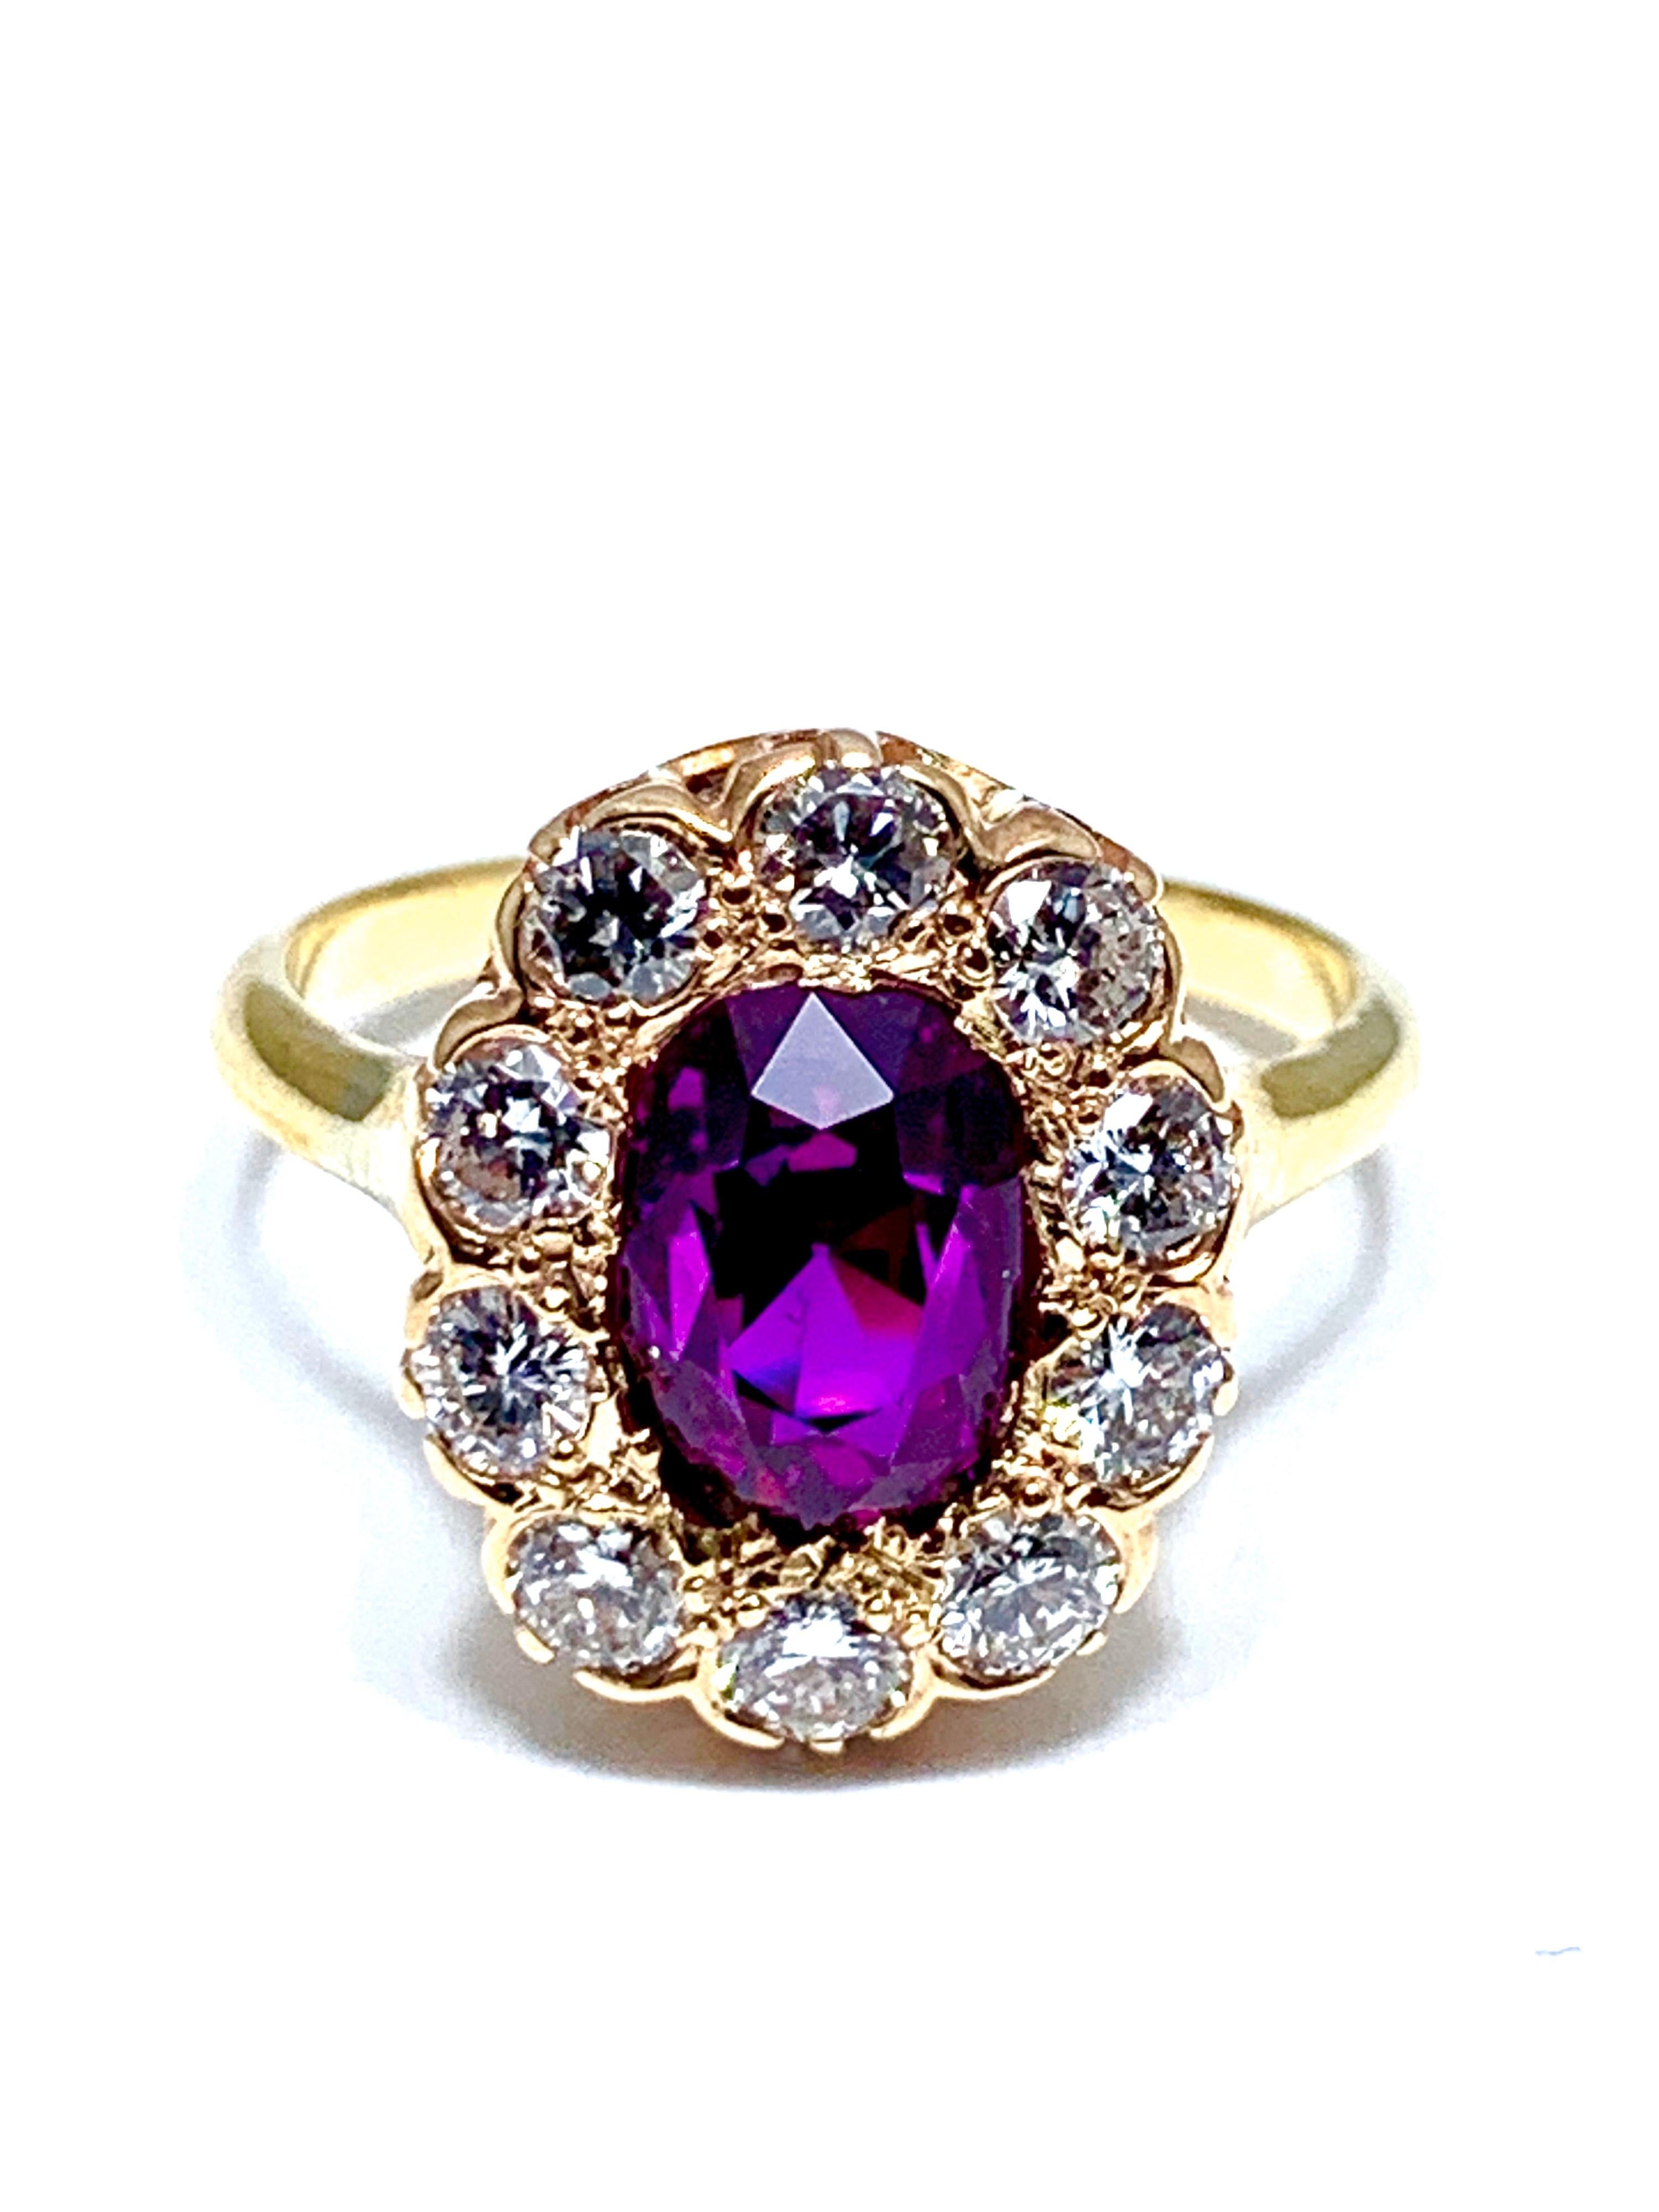 An absolutely eye catching purplish pink Sapphire and Diamond yellow gold ring.  The vibrant Sapphire is cushion shaped and weighs 3.21 carats.  It is set with a single row of 10 round brilliant diamonds weighing 0.80 carats.  The Sapphire has a